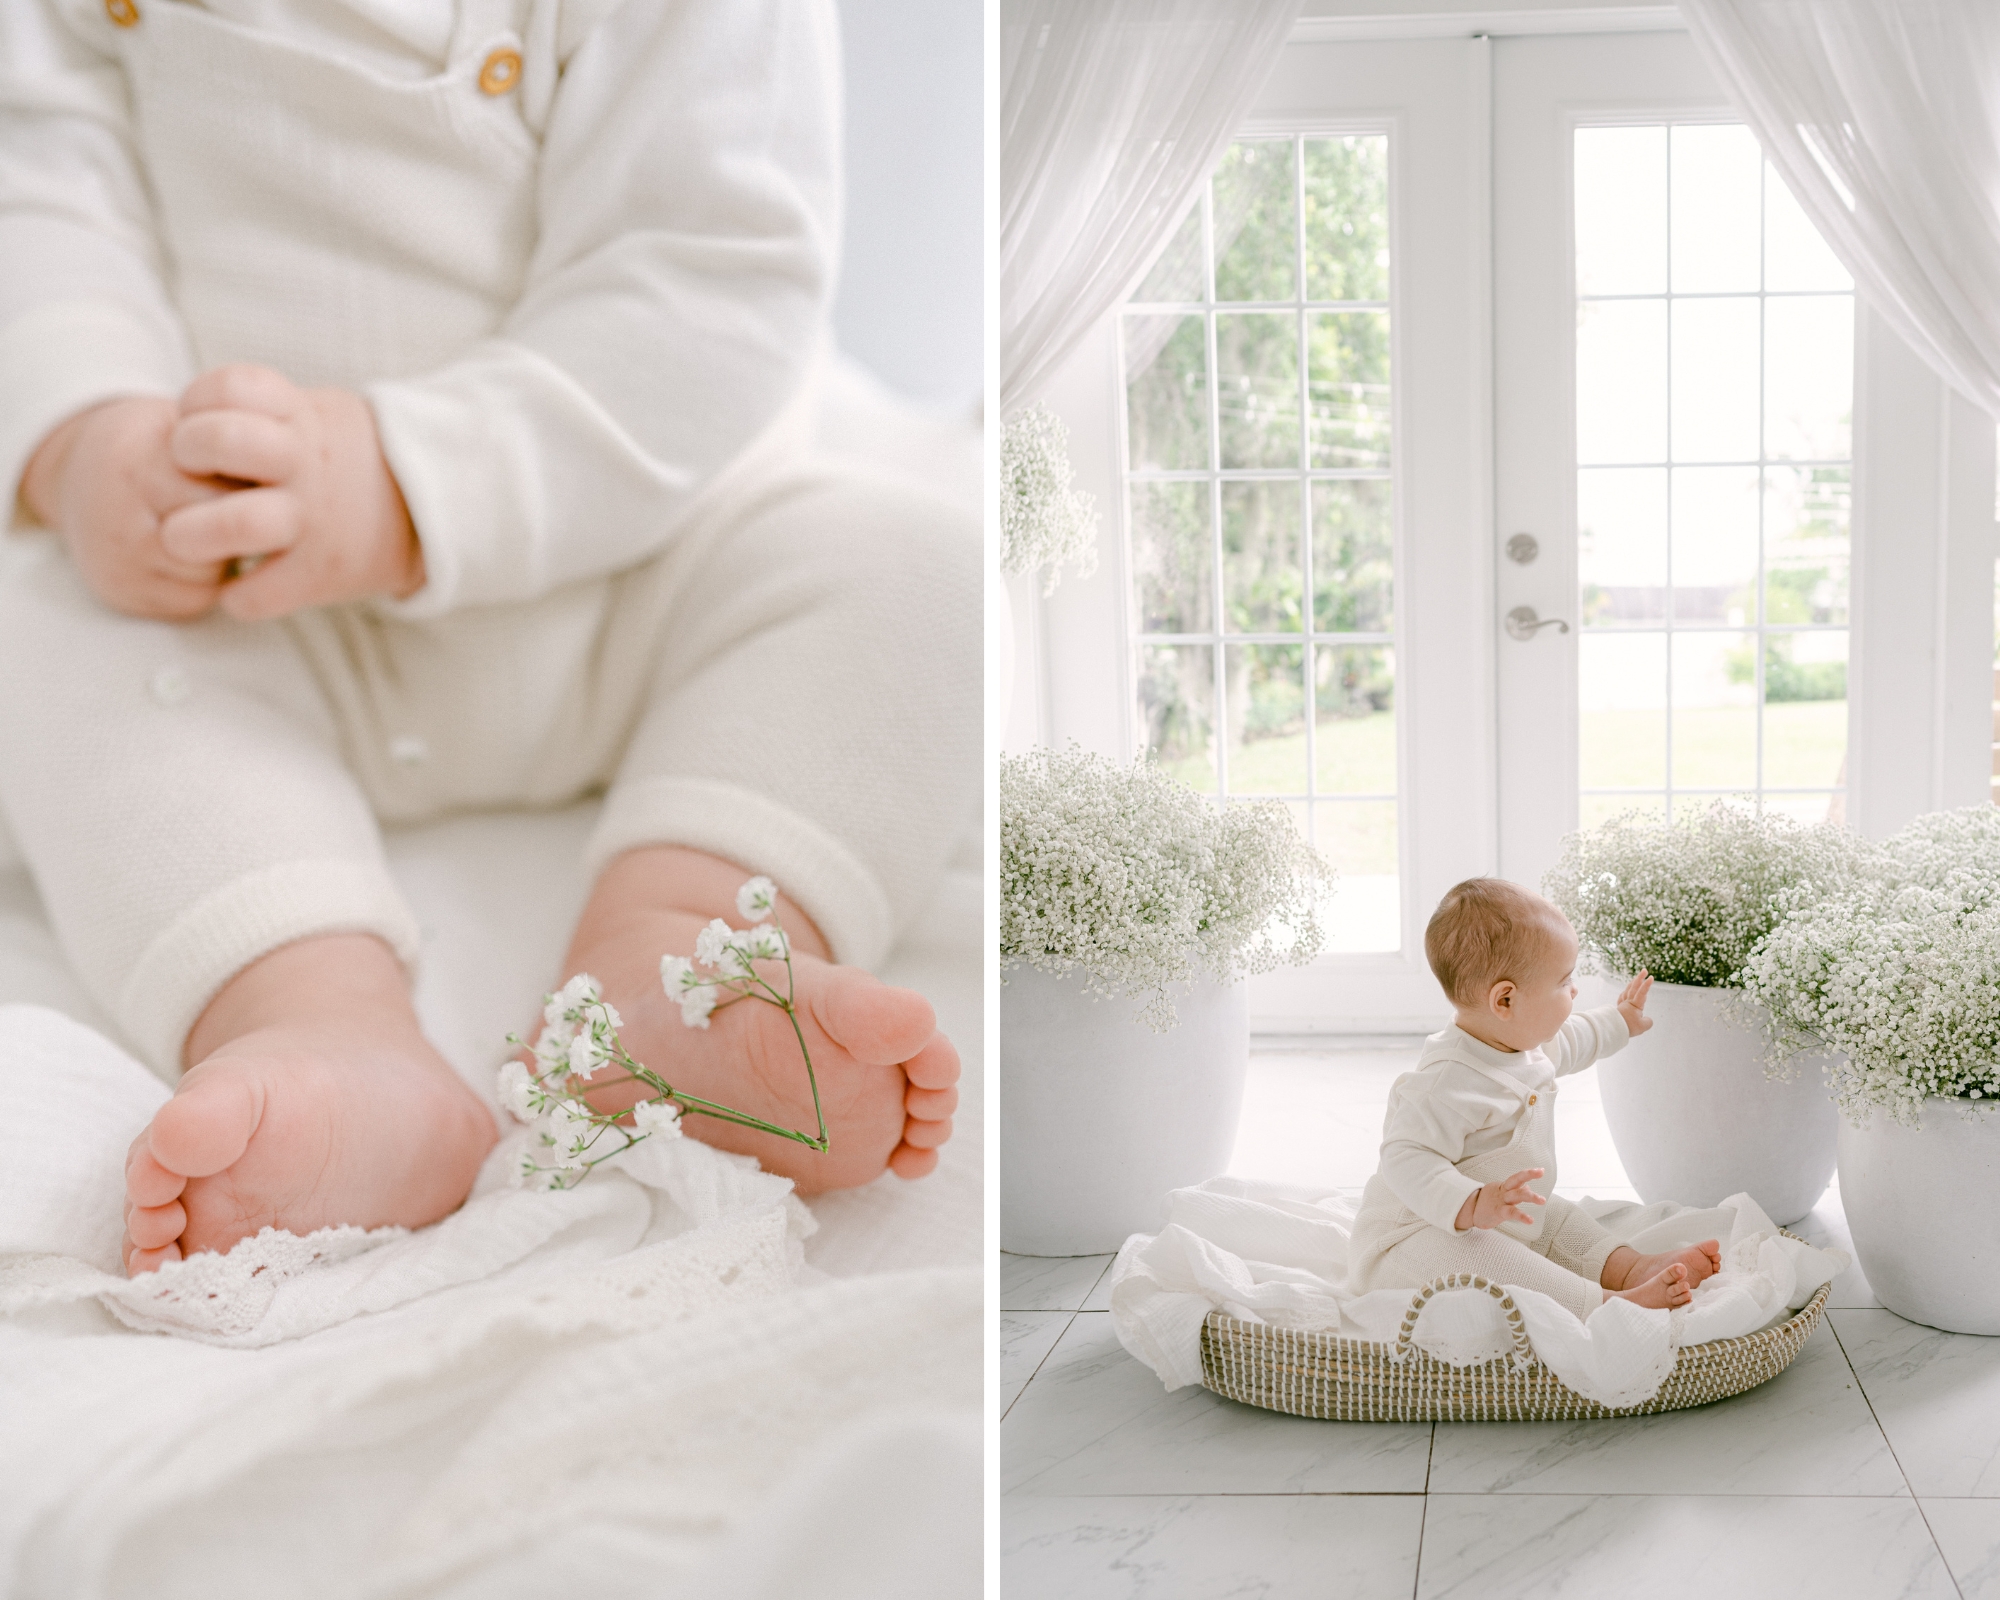 Baby details with baby's breath